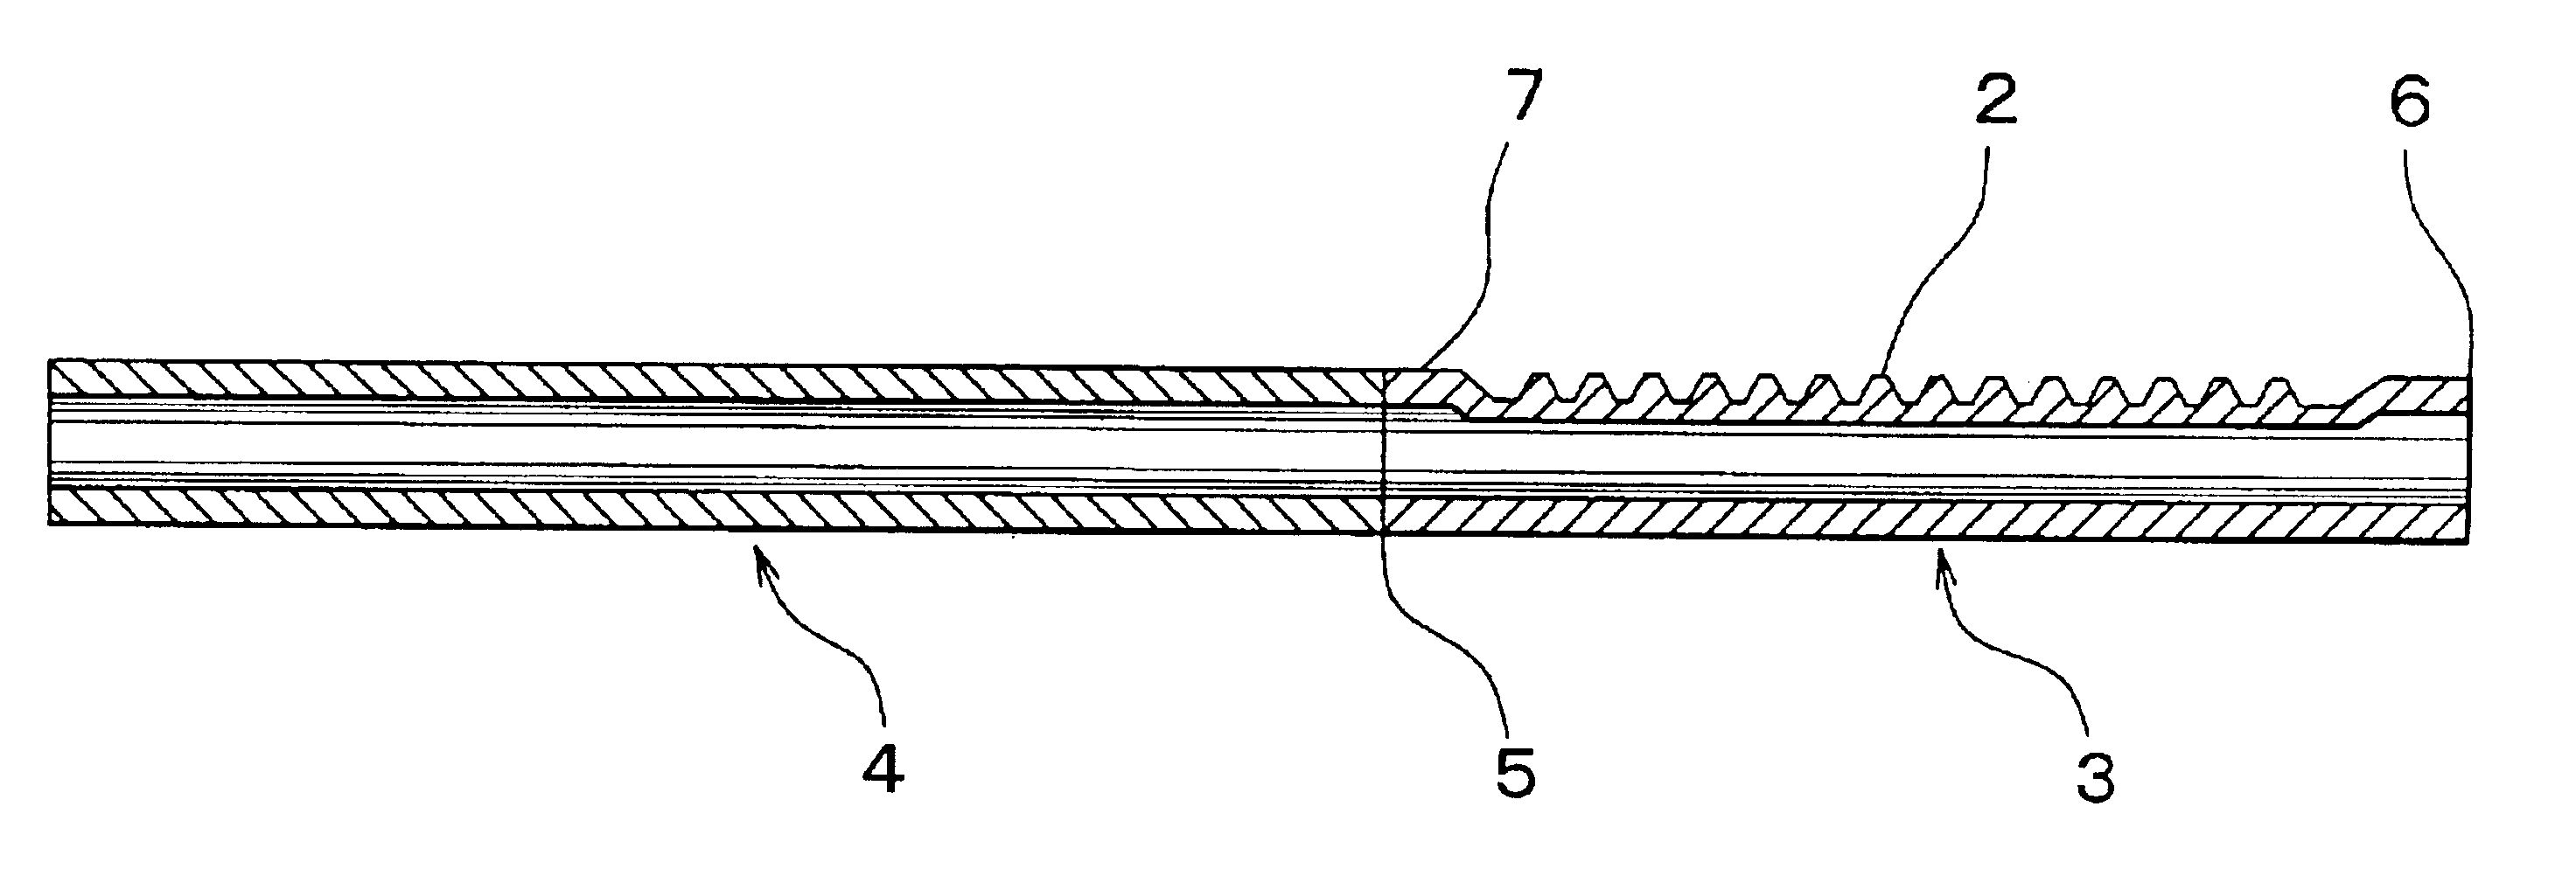 Hollow steering rack bar and its manufacturing method